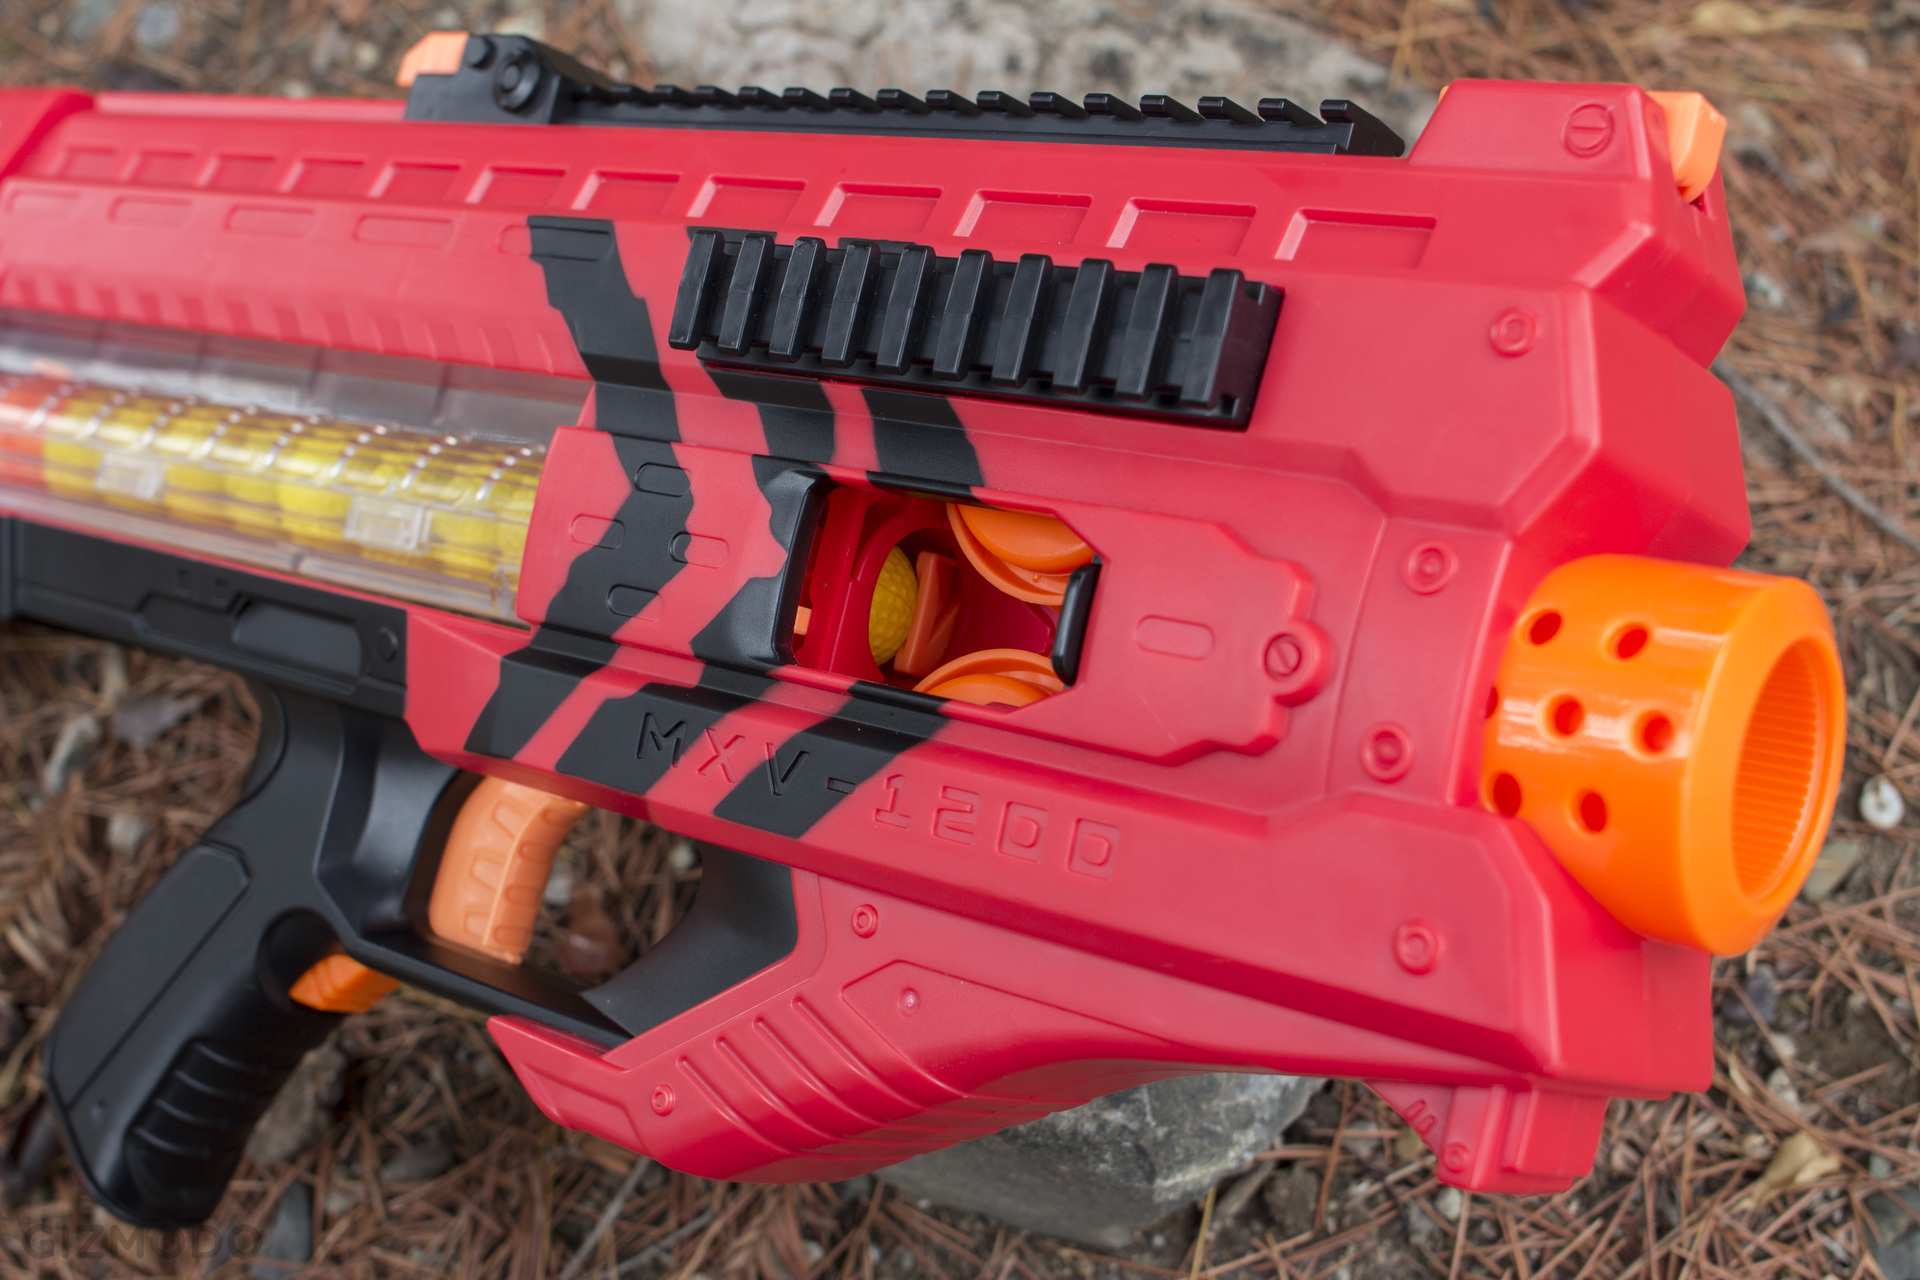 Nerf Rival Review: The Evolution Of Foam Warfare